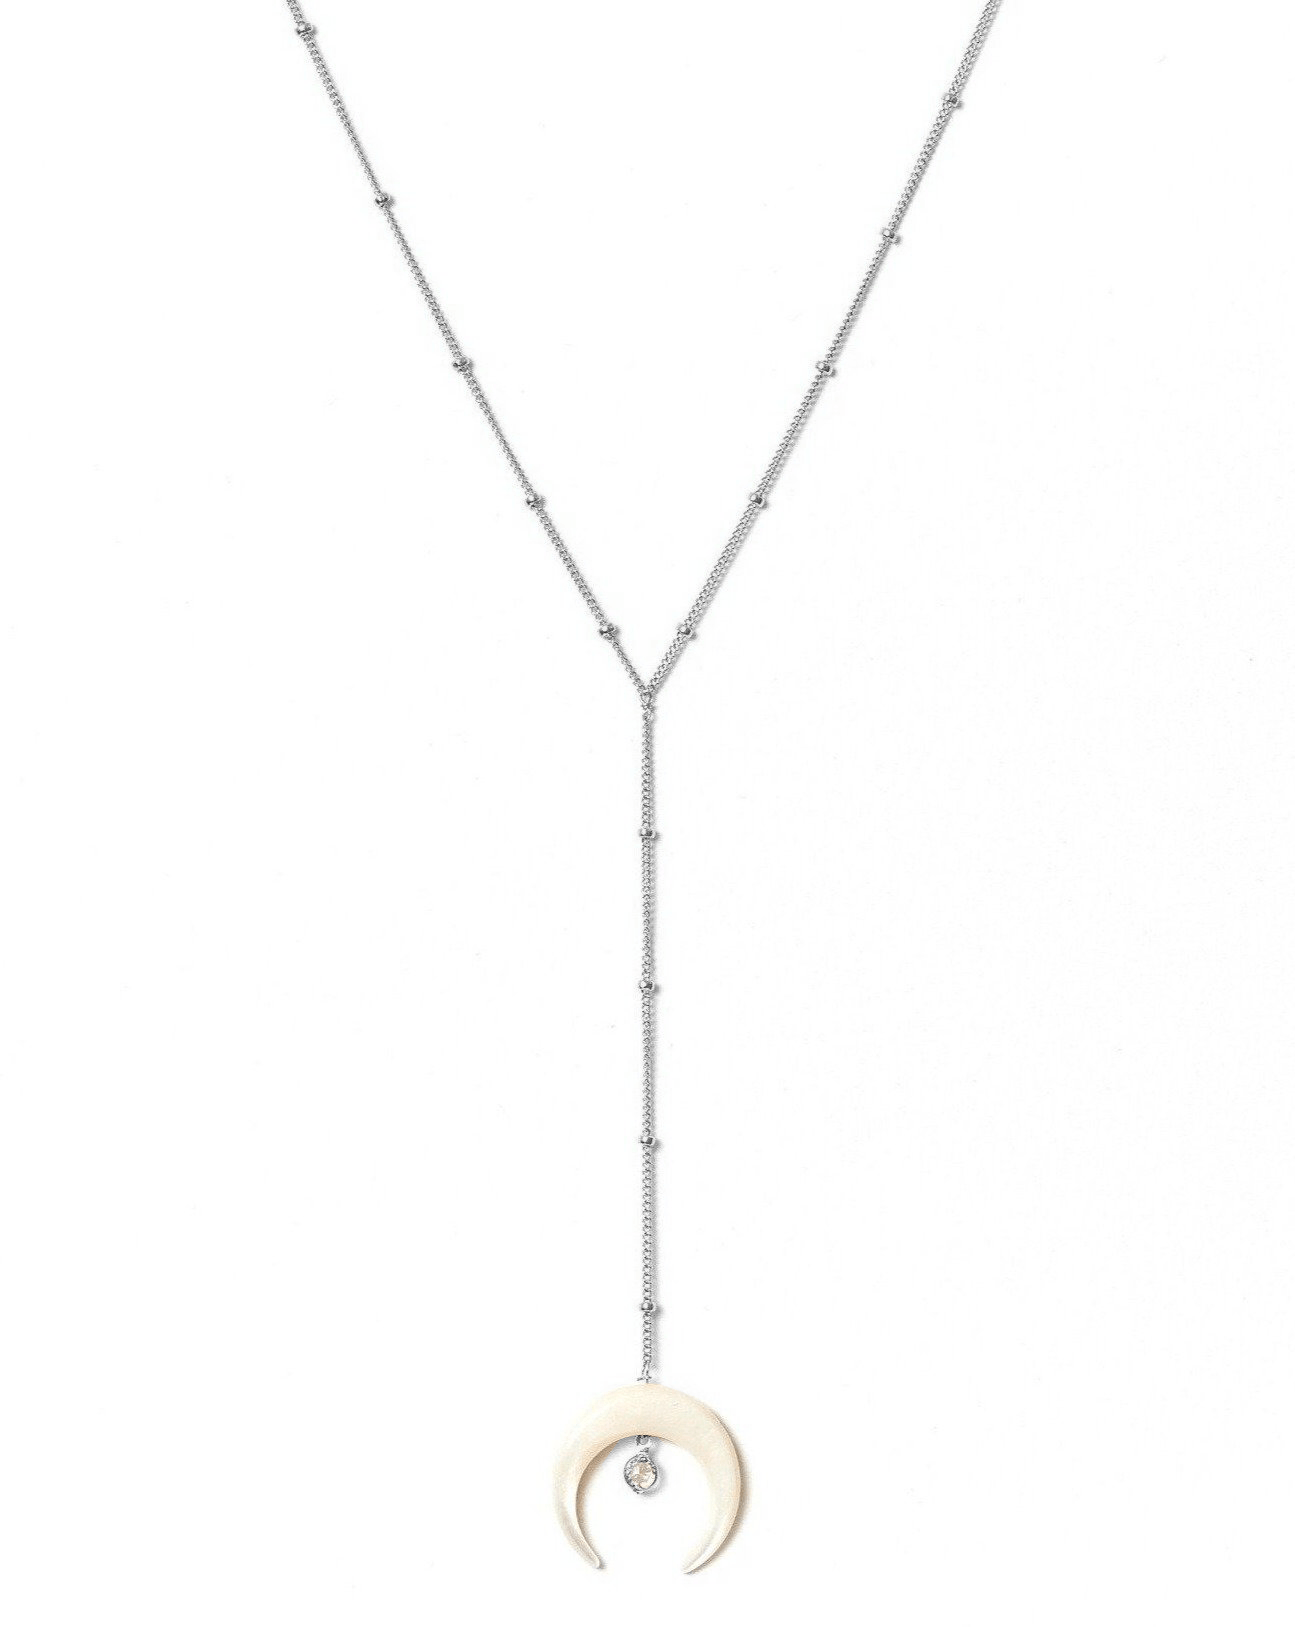 Baque Lar Necklace by KOZAKH. A 16 to 18 inch adjustable length, 3 inches chain drop lariat style necklace in Sterling Silver, featuring a hand-carved Mother of Pearl moon charm and a 2mm Swarovski Crystal.